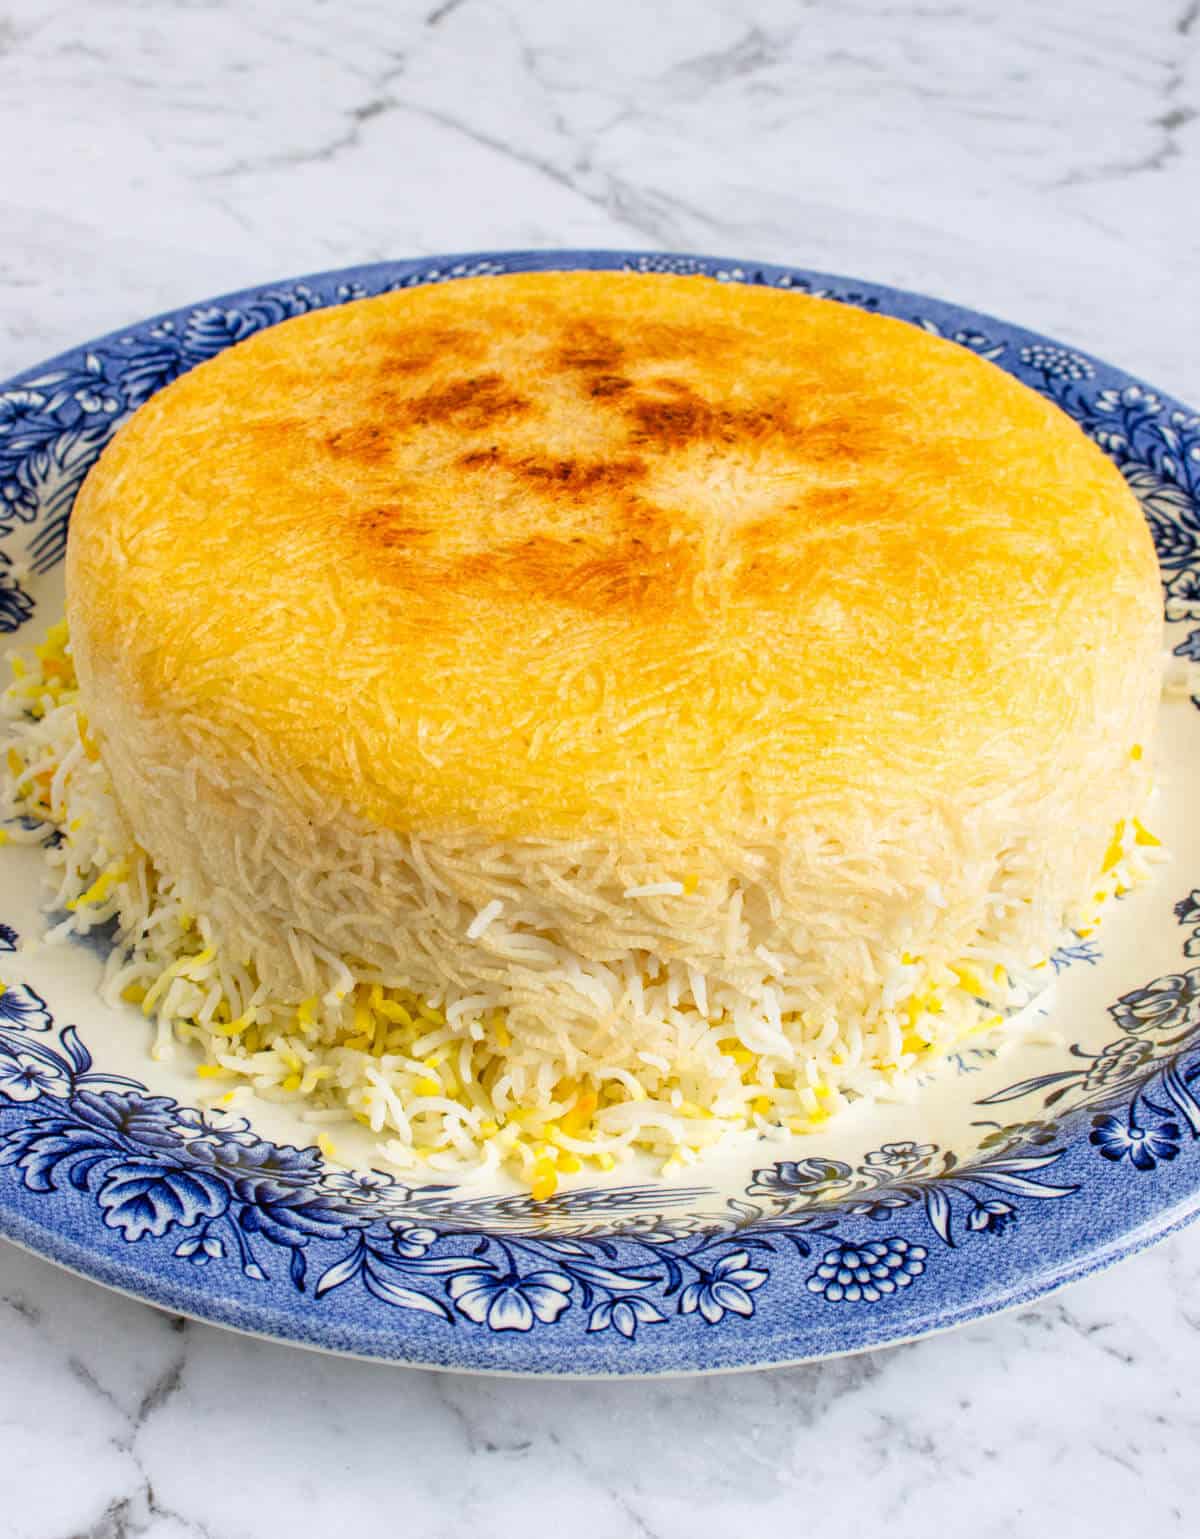 https://cookingwithayeh.com/wp-content/uploads/2021/02/Persian-Rice-with-Crispy-Tahdig-01.jpg